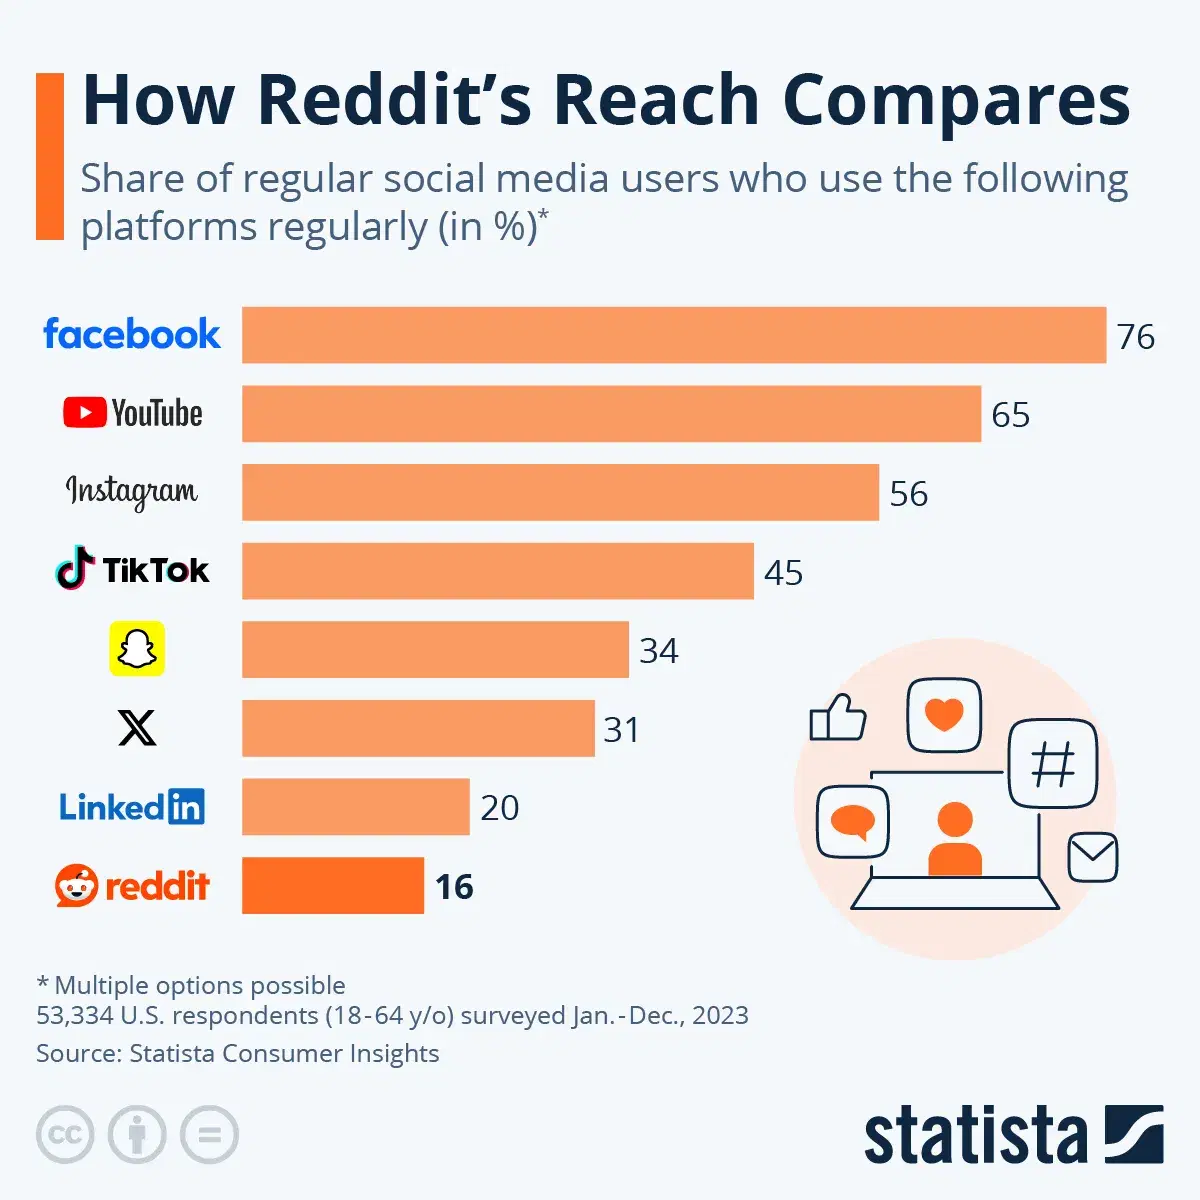 Reddit's Reach Compared to Other Platforms